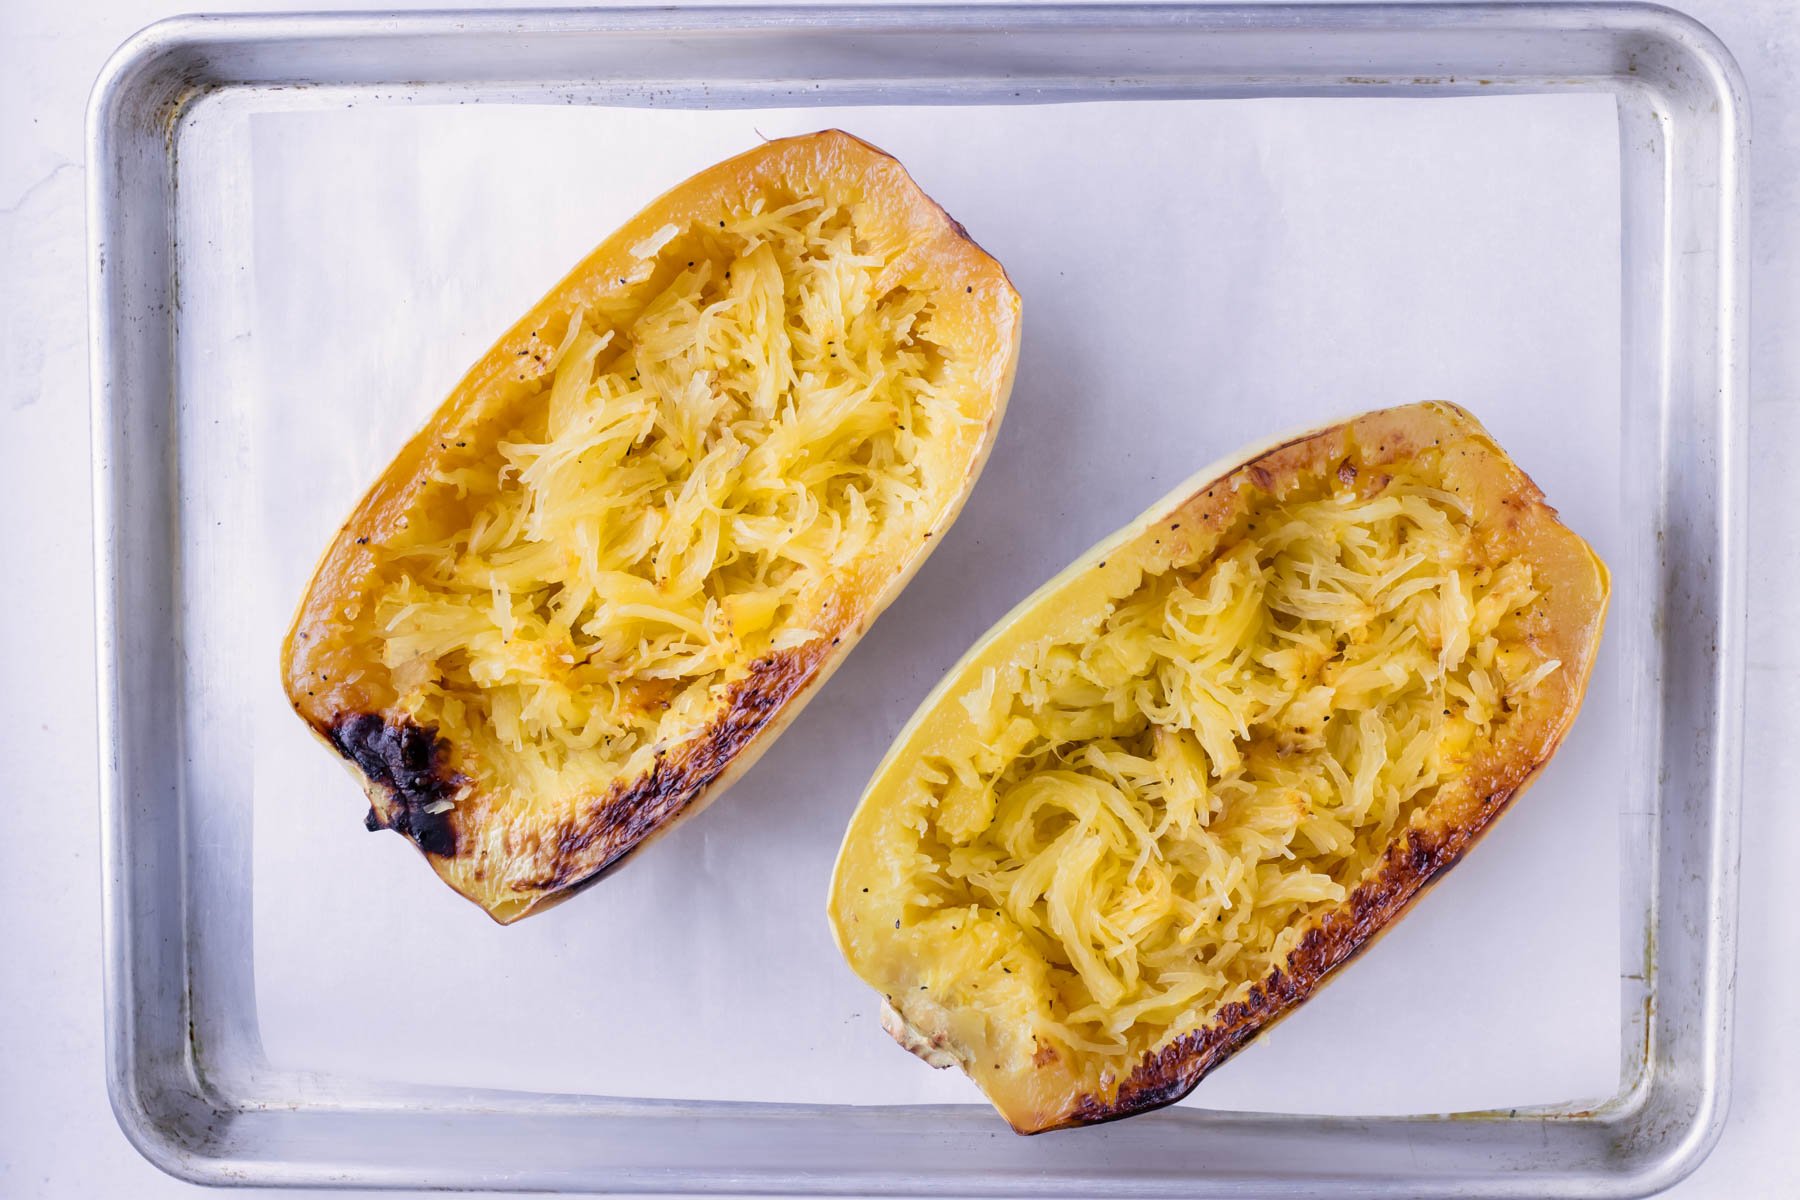 Roast spaghetti squash in the oven on a large baking sheet.